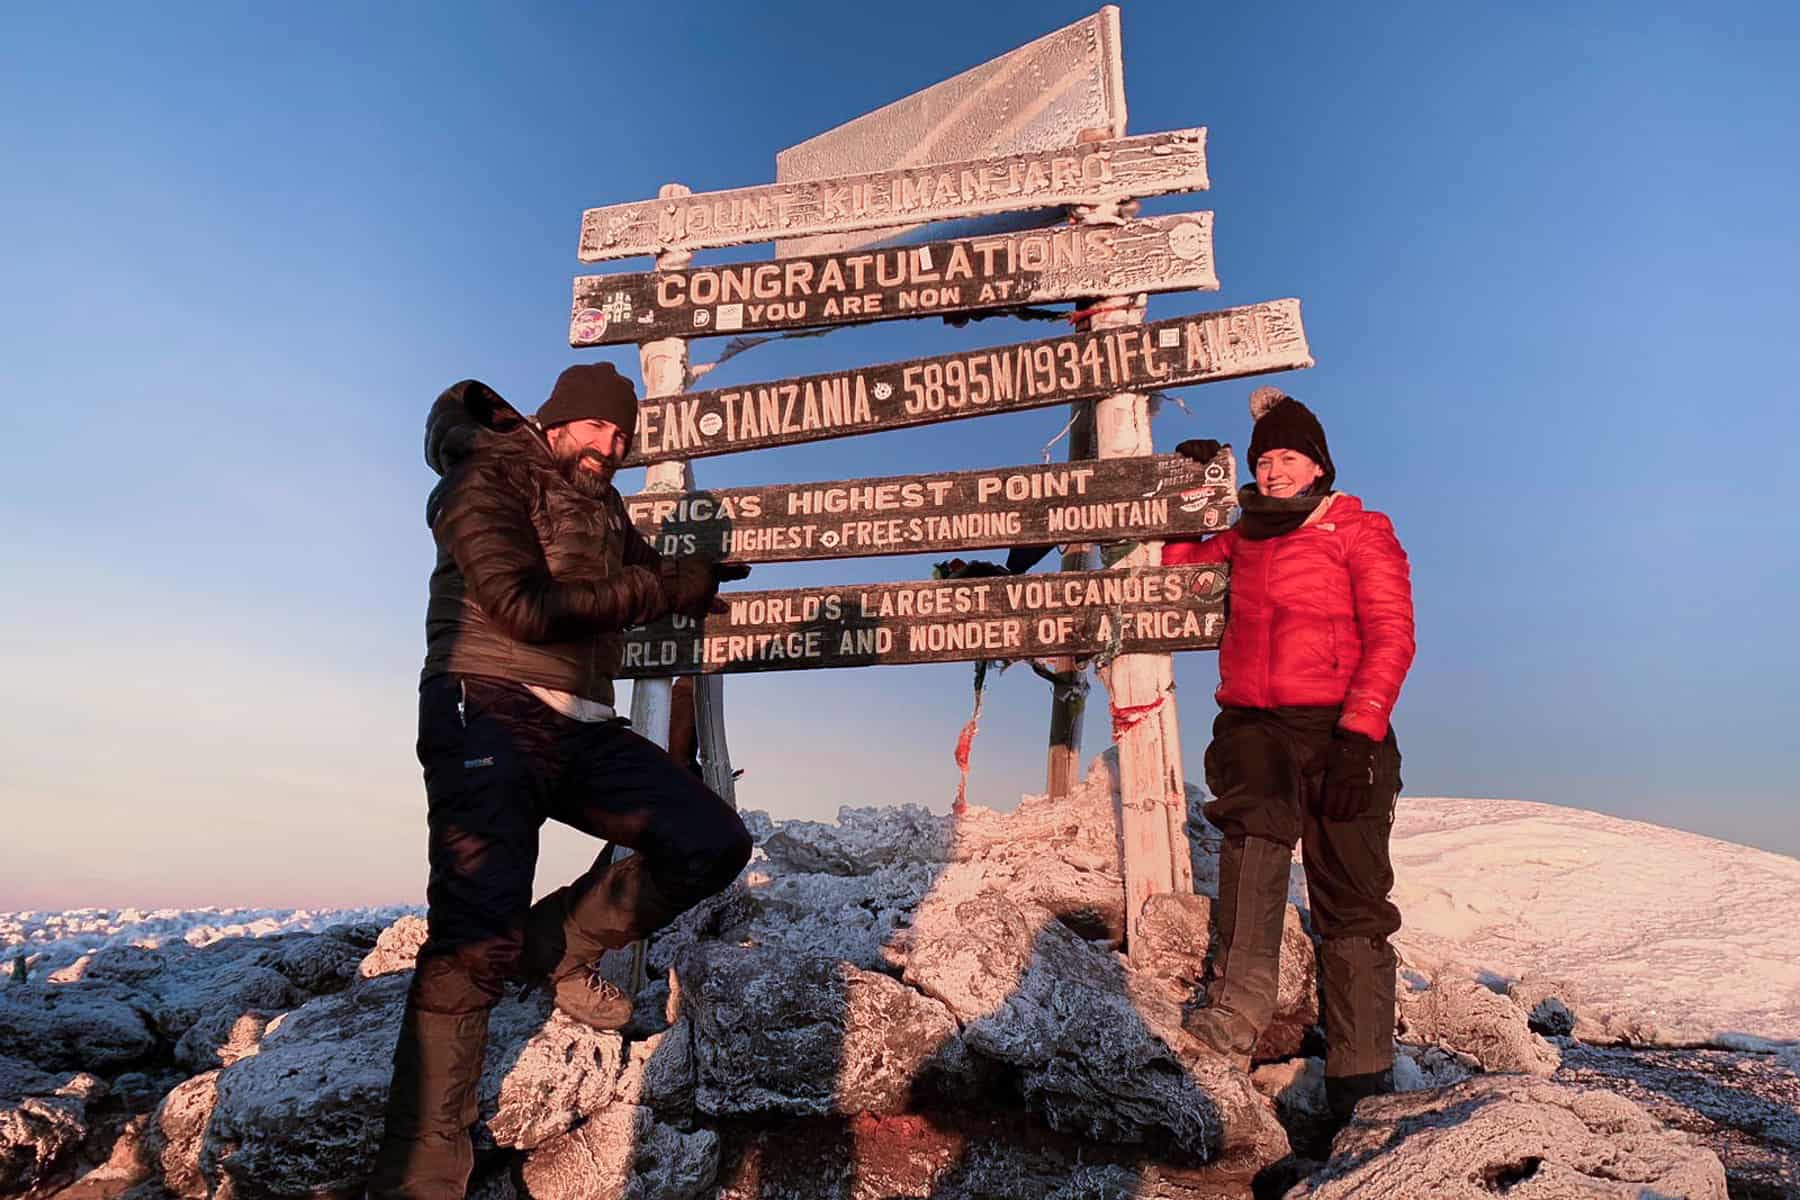 A man and woman stand in front of the mountain top, snow-covered wooden sign for Uhuru Peak after climbing Kilimanjaro.